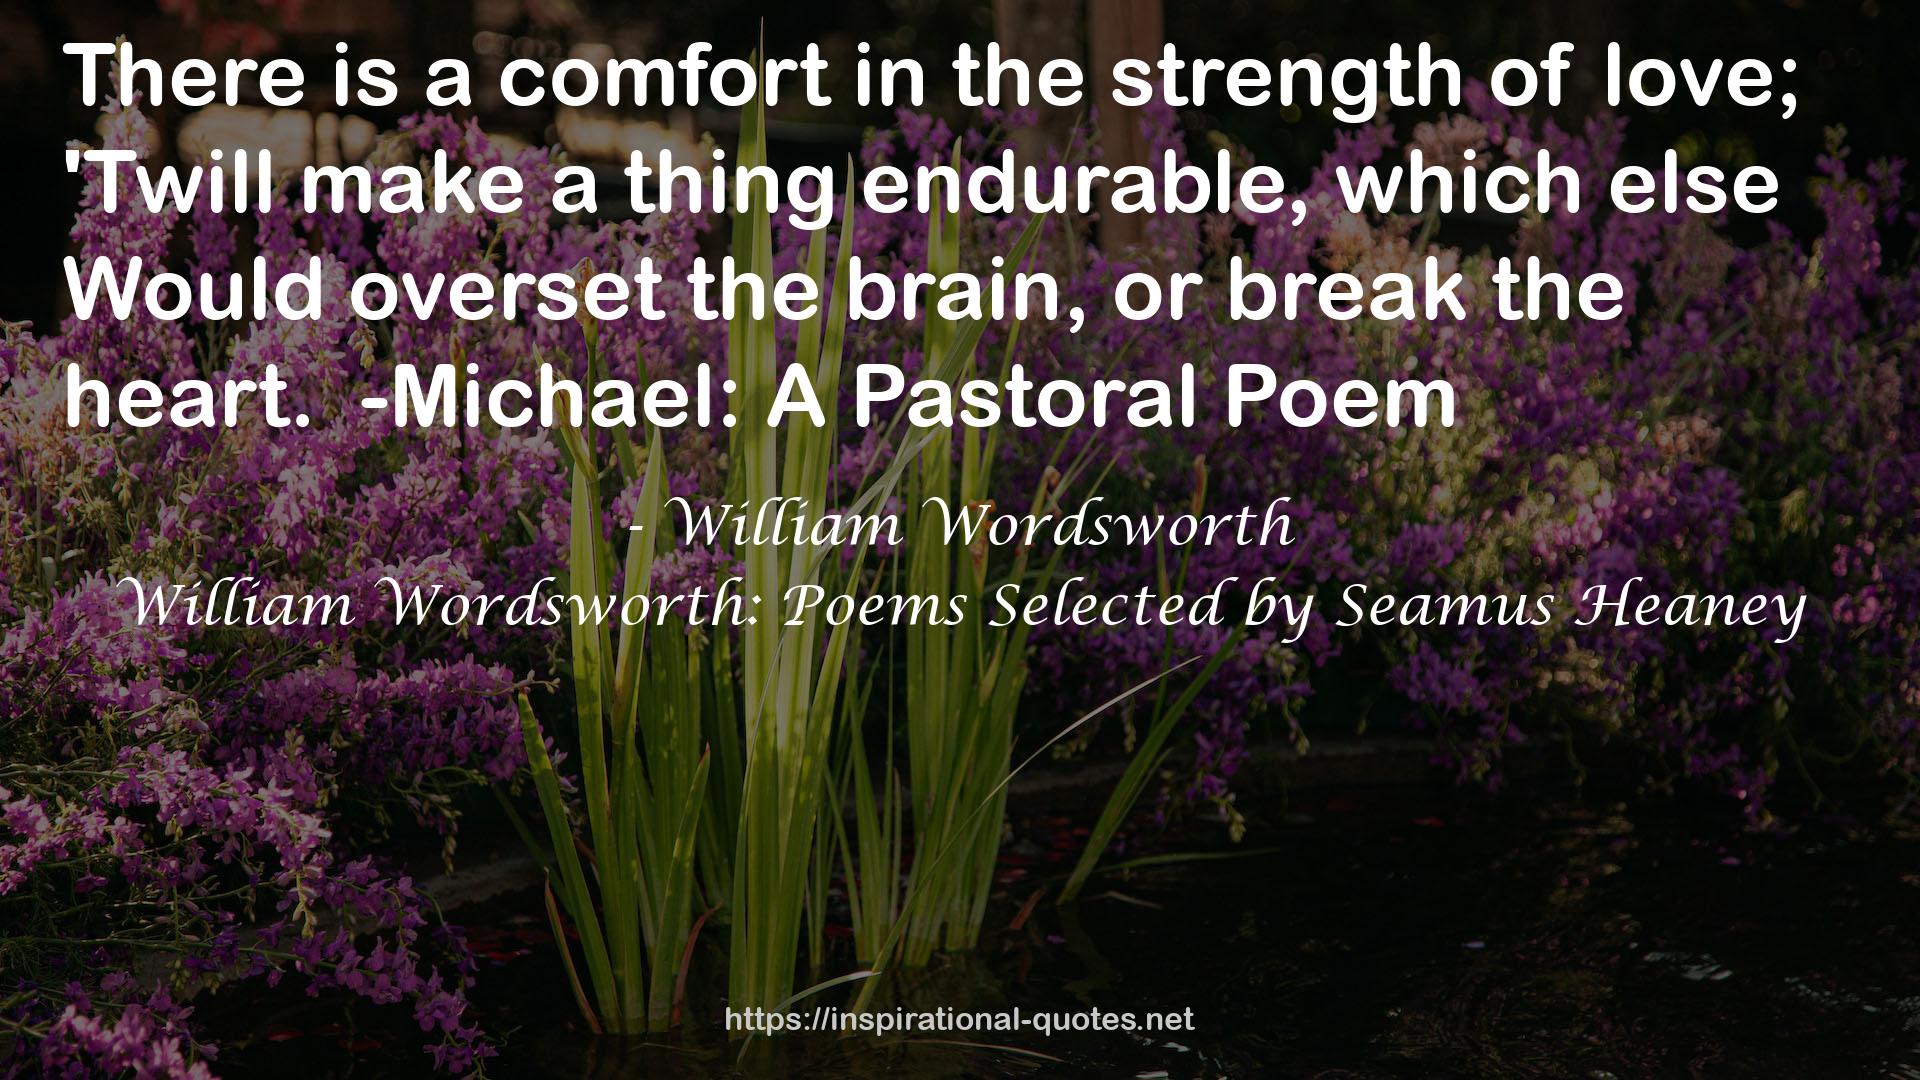 William Wordsworth: Poems Selected by Seamus Heaney QUOTES